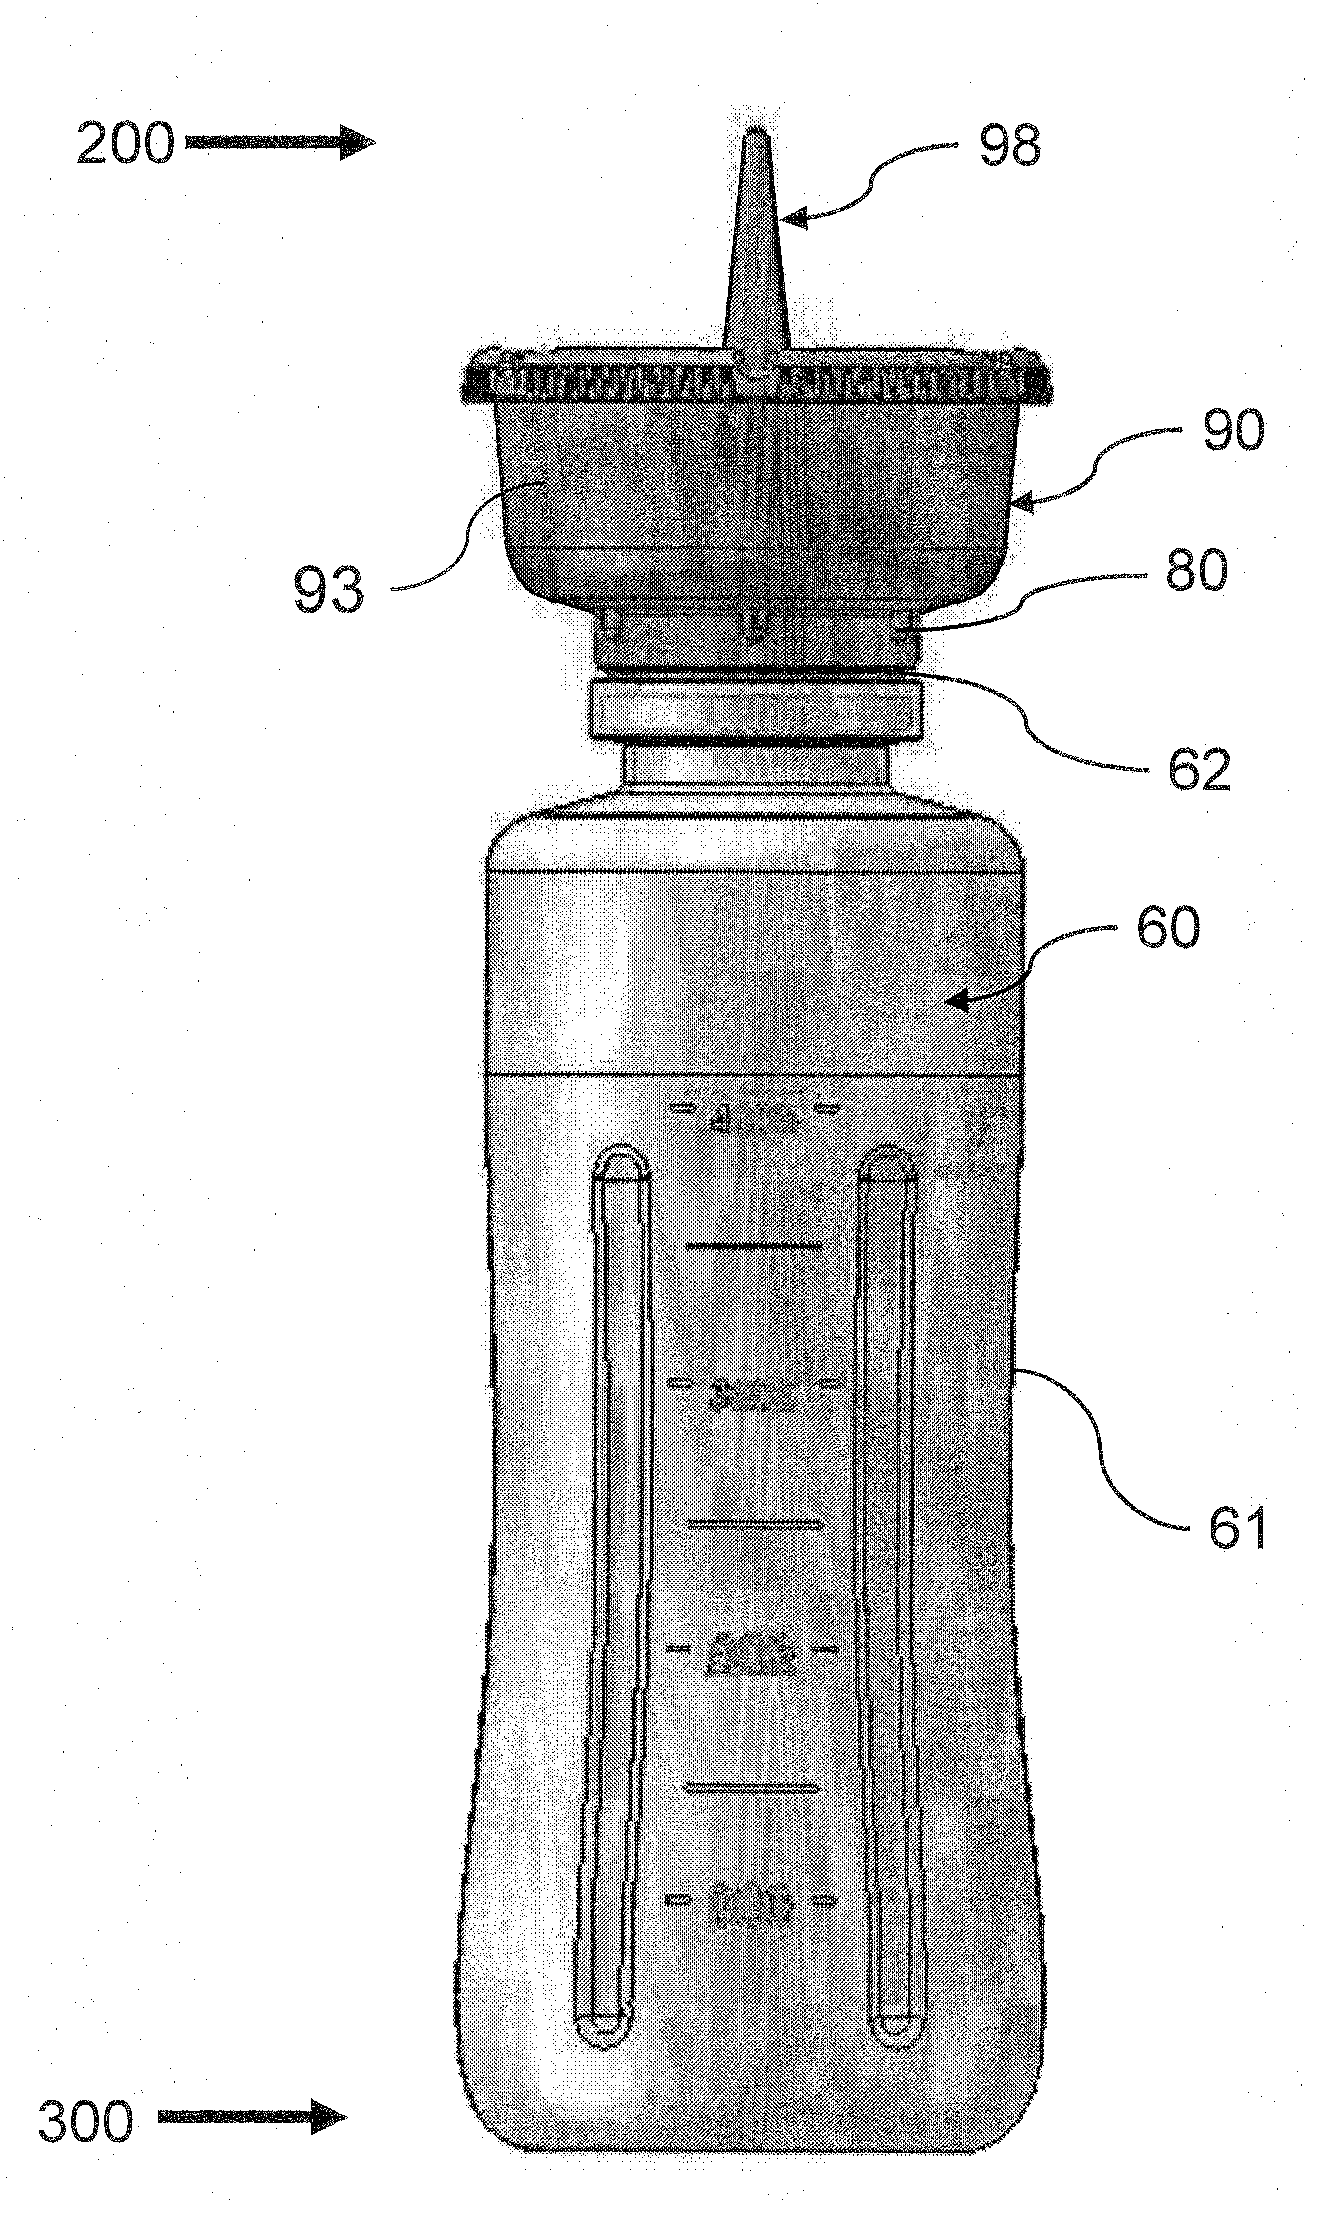 Device and Method for Abscess Irrigation